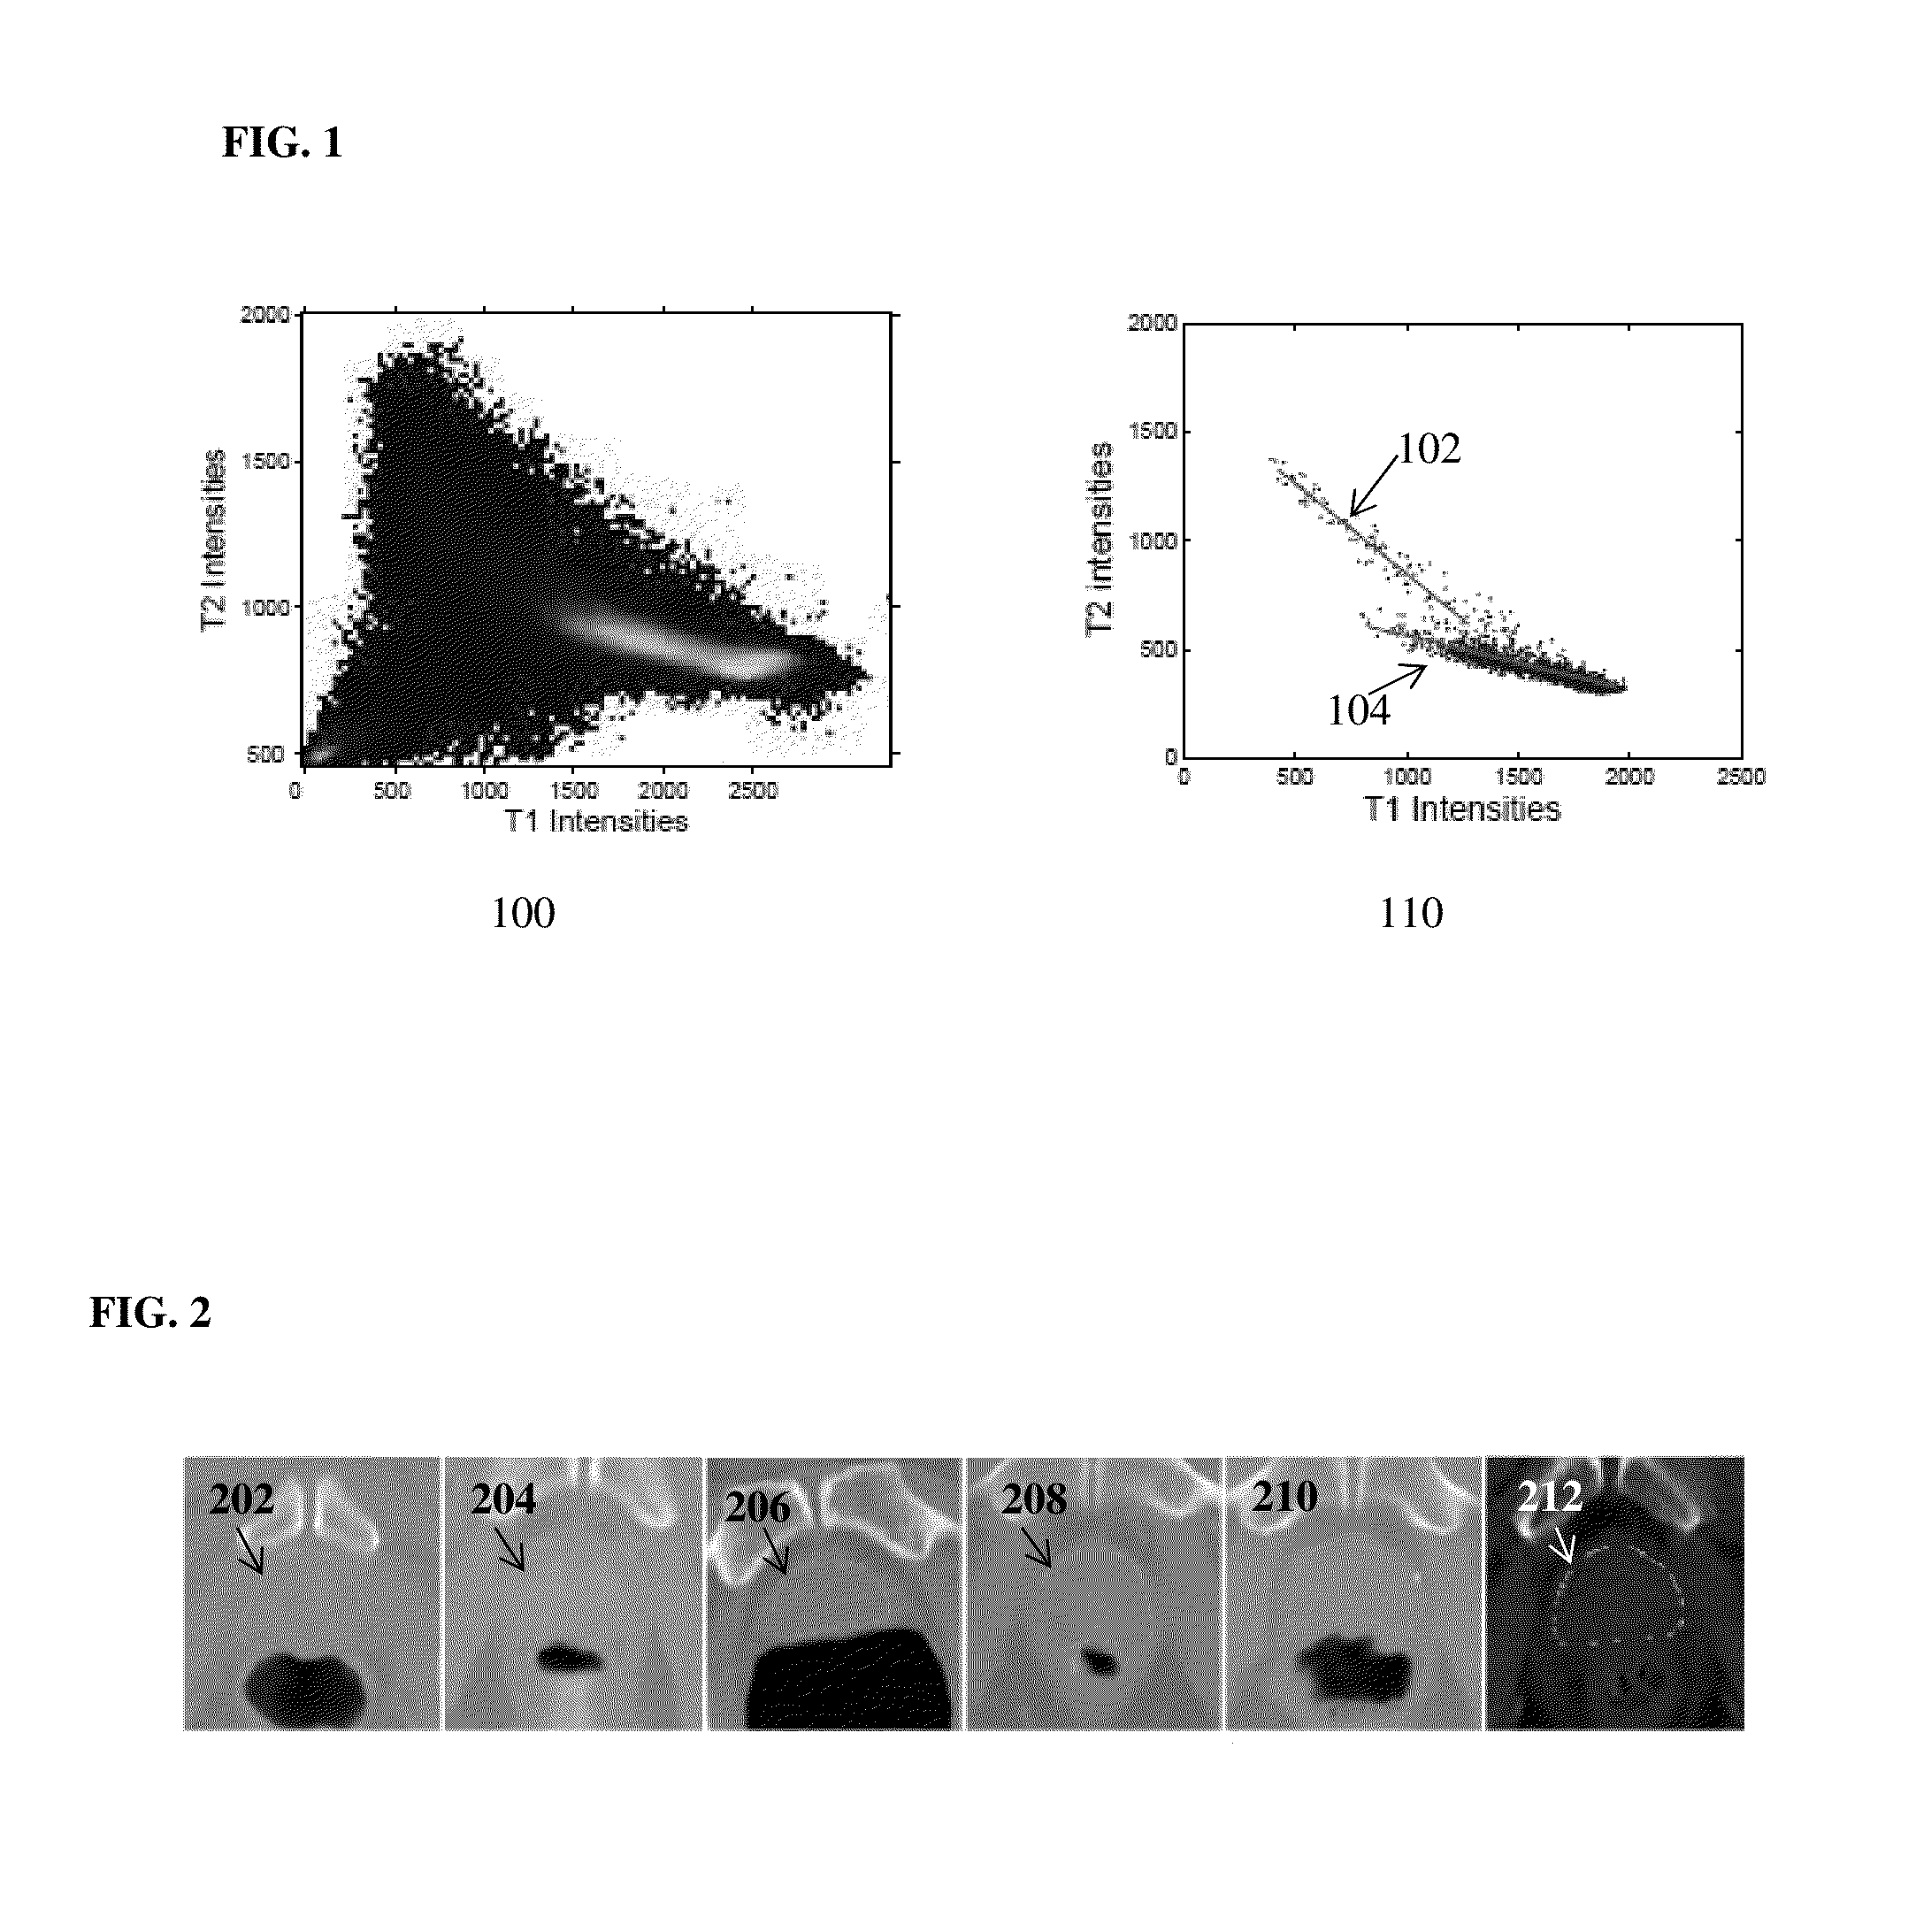 Method and system for cross-domain synthesis of medical images using contextual deep network